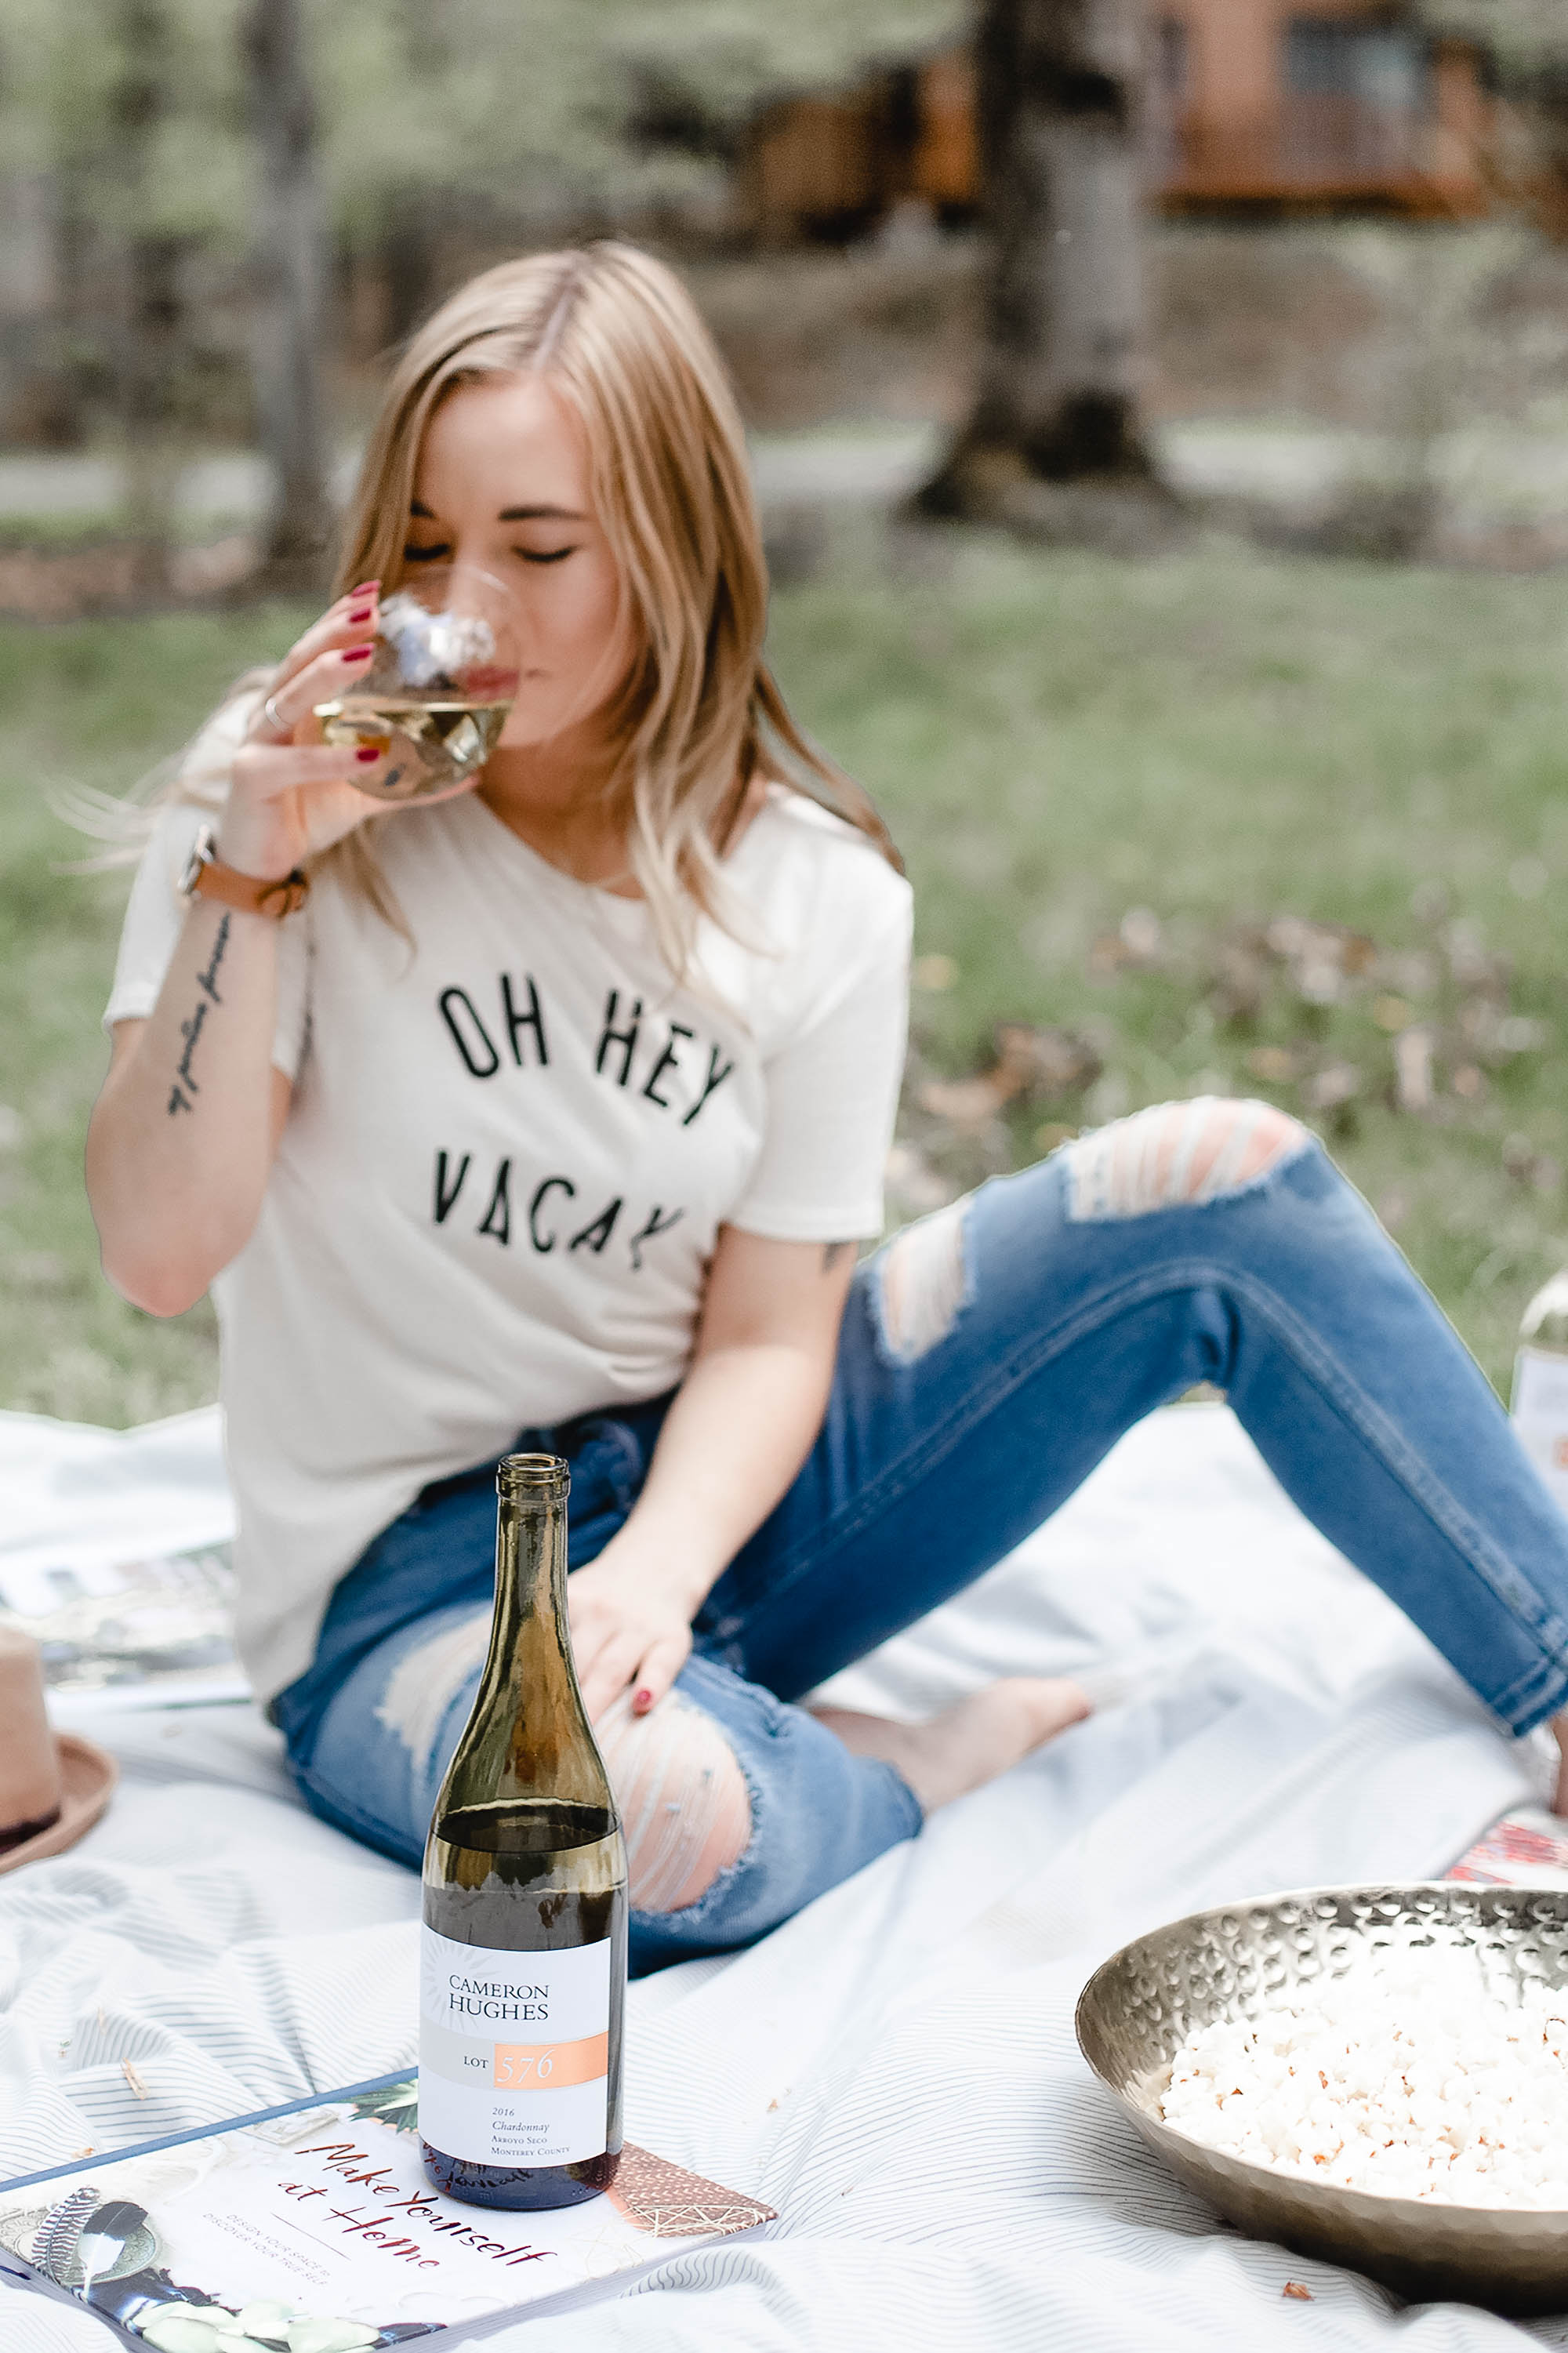 Girl sipping wine from Cameron Hughes Wine in an Oh Hey Vacay T-Shirt